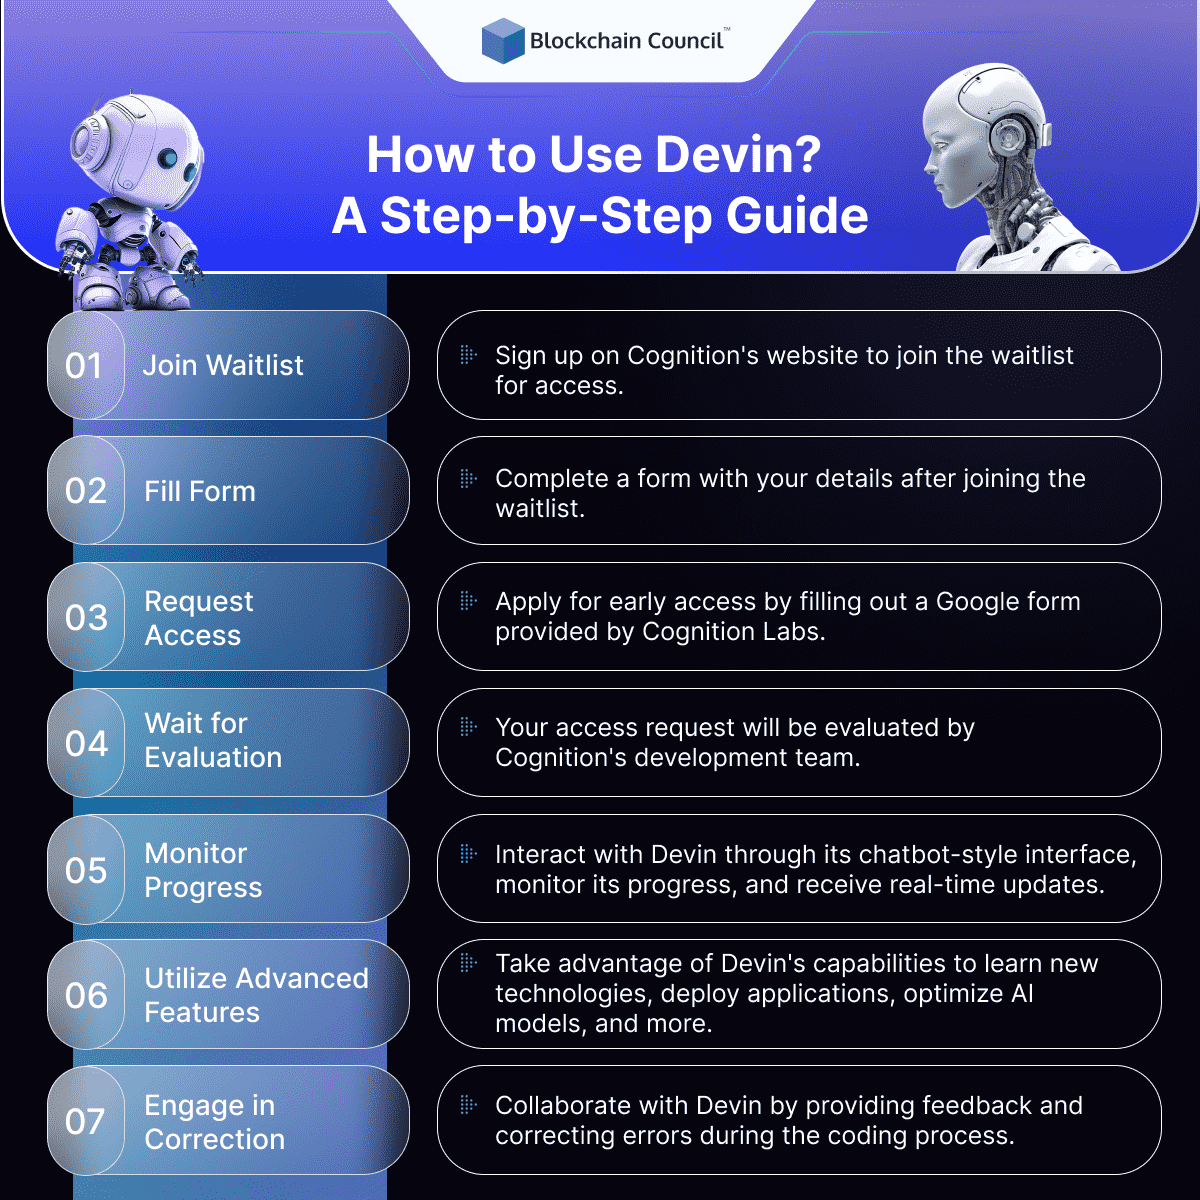 How to Use Devin? A Step-by-Step Guide